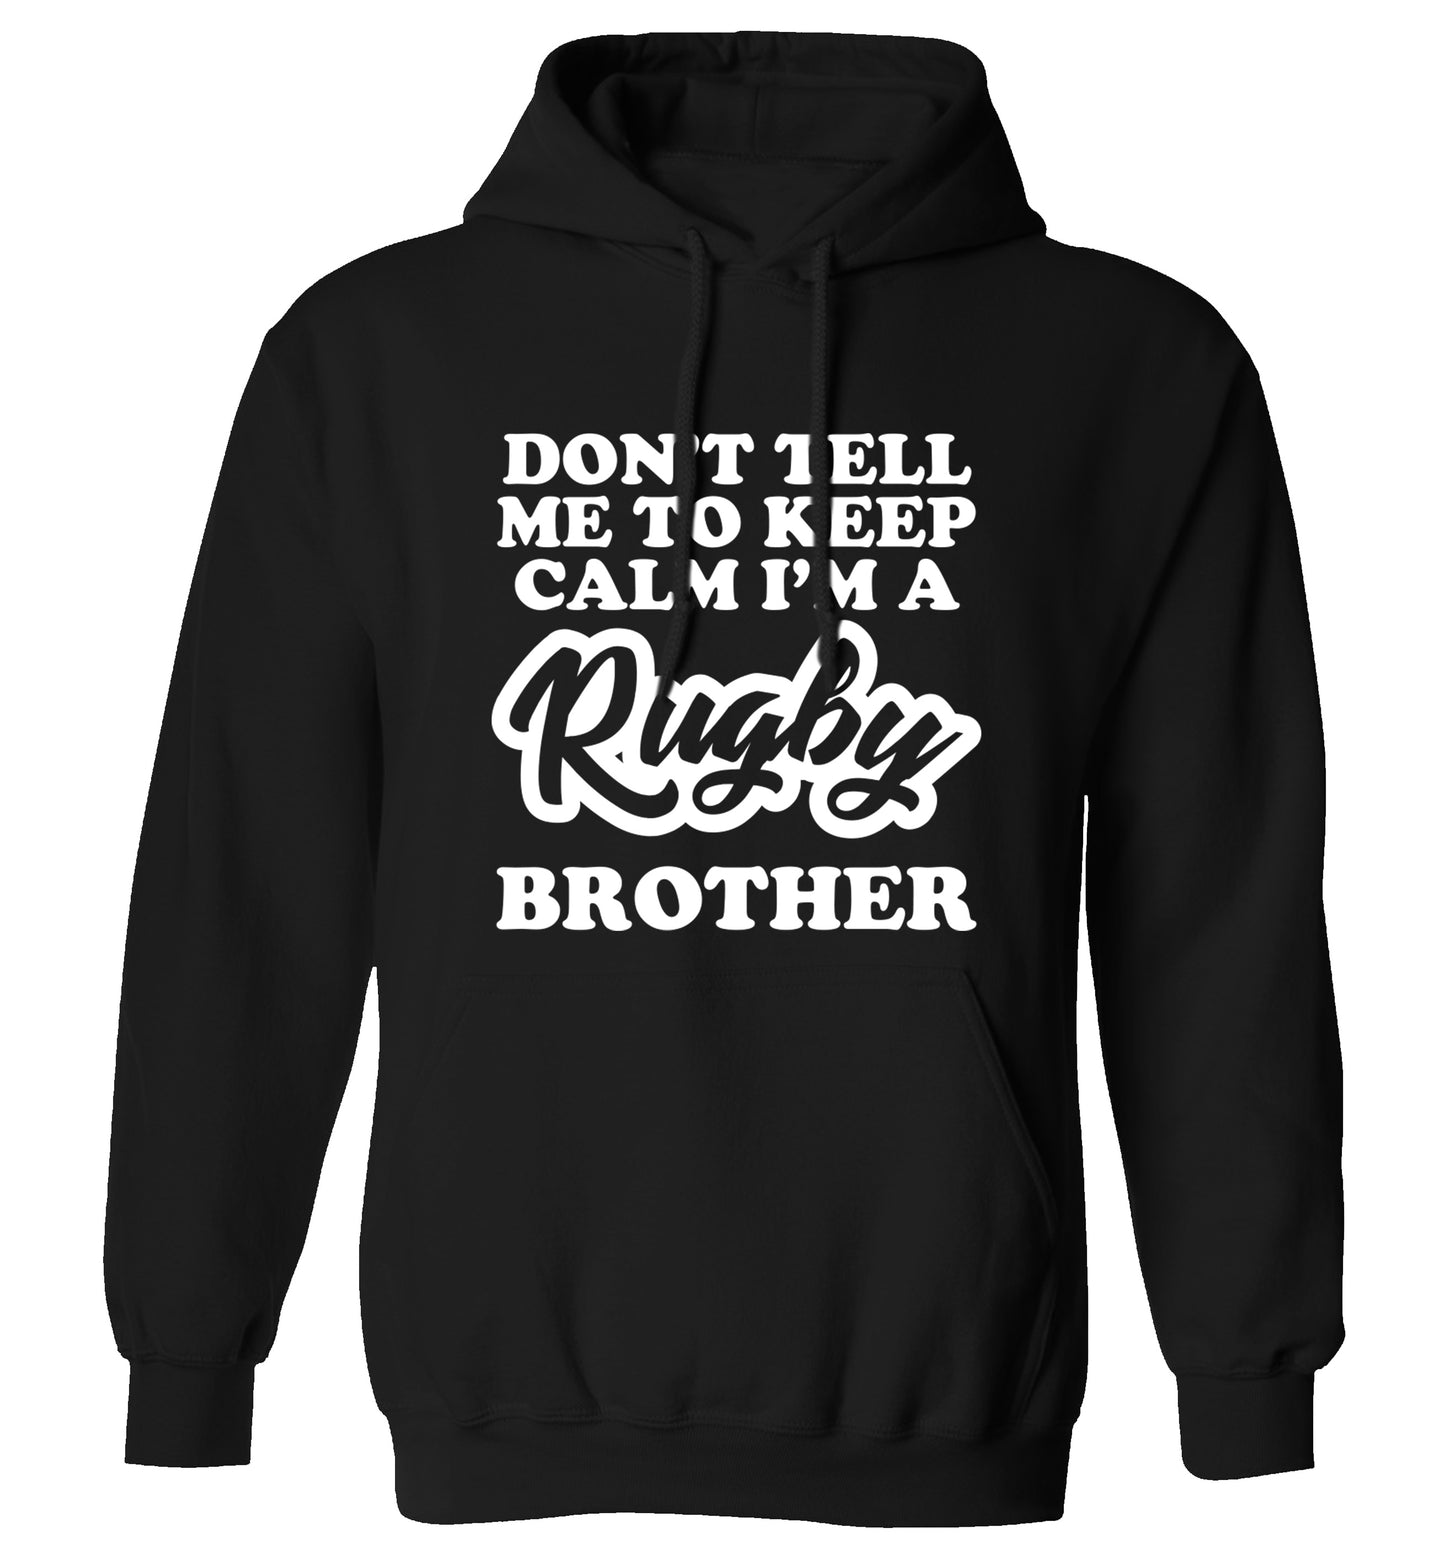 Don't tell me keep calm I'm a rugby brother adults unisex black hoodie 2XL